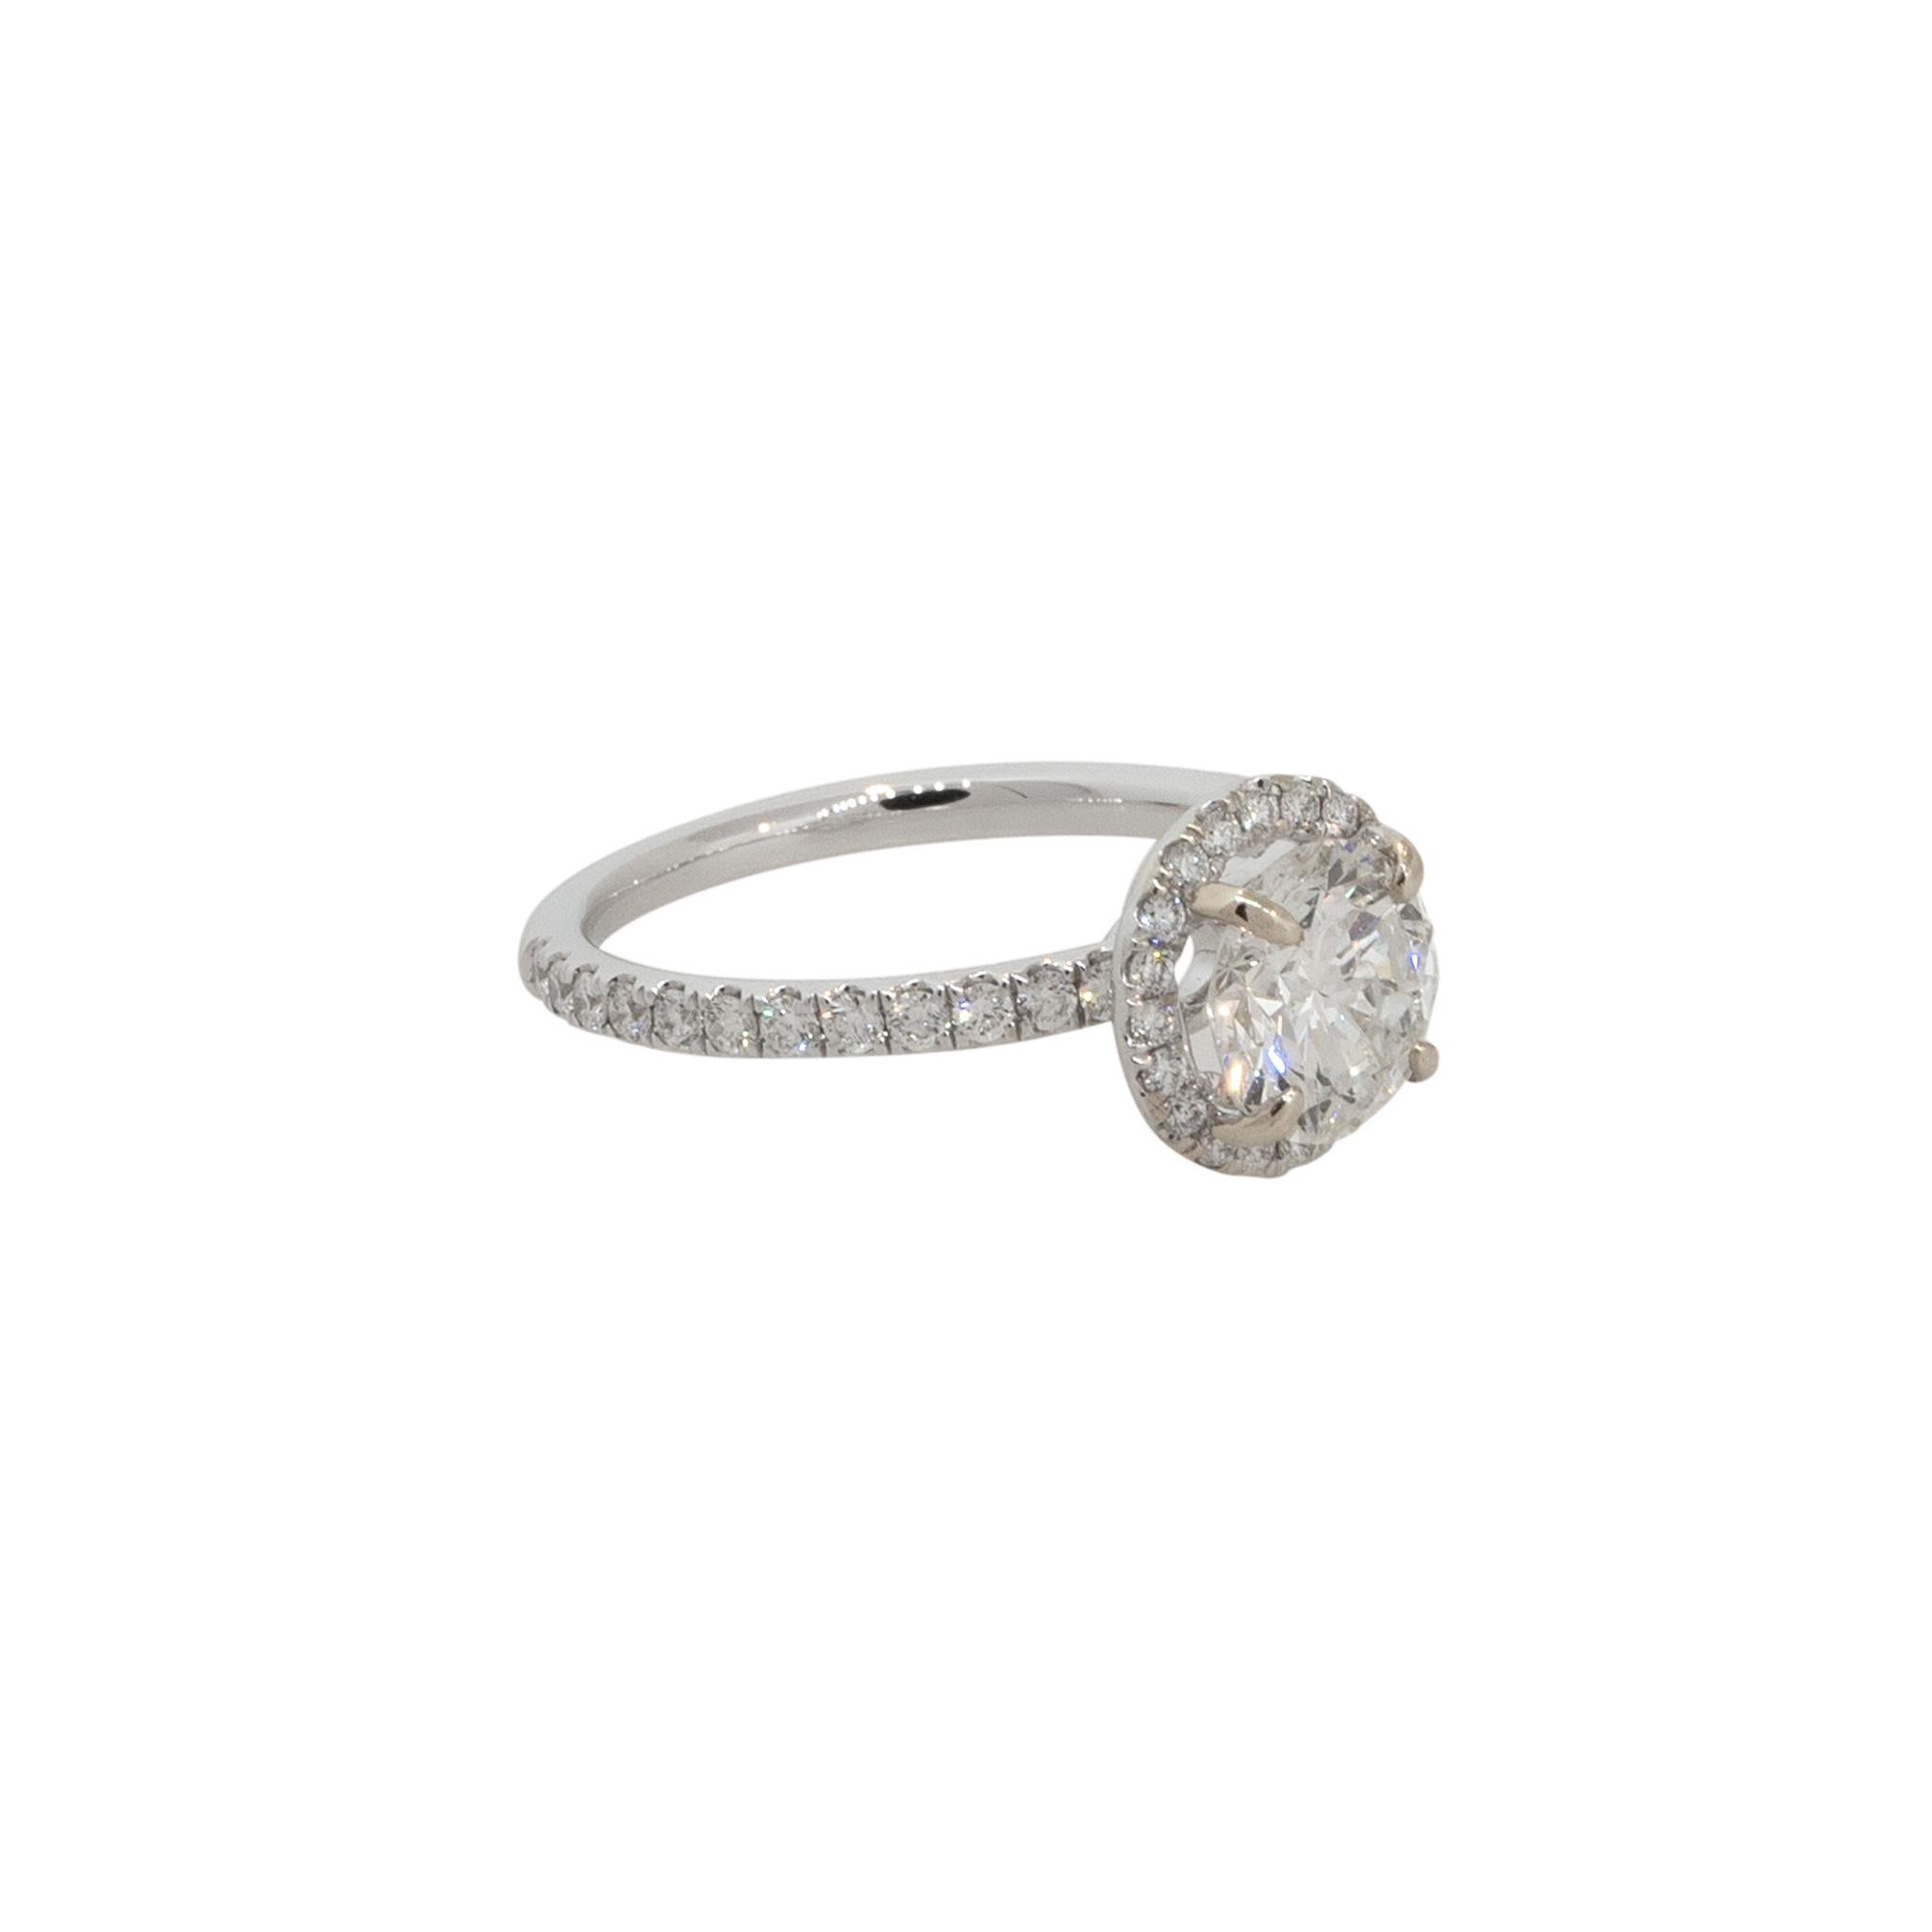 18k White Gold 2.56ctw Round Brilliant Diamond Halo Engagement Ring

Raymond Lee Jewelers in Boca Raton -- South Florida’s destination for diamonds, fine jewelry, antique jewelry, estate pieces, and vintage jewels.

Style: Women's 4 Prong Halo